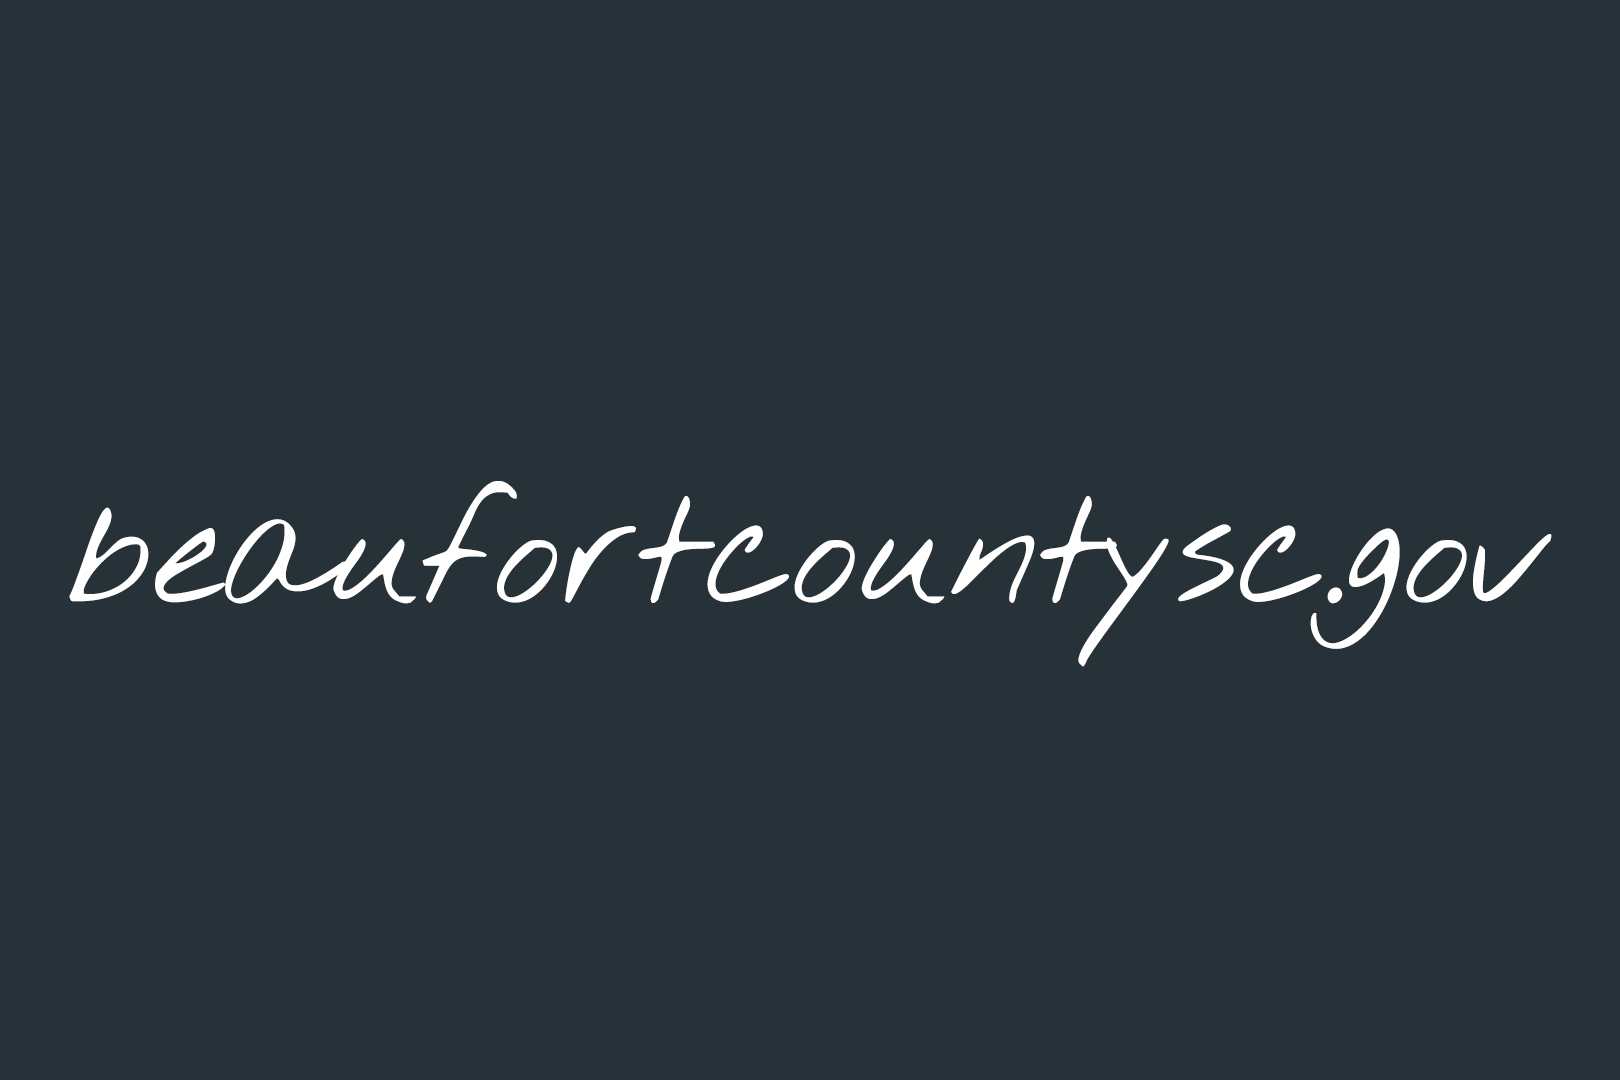 Beaufort County Launches New Website and New Website Address